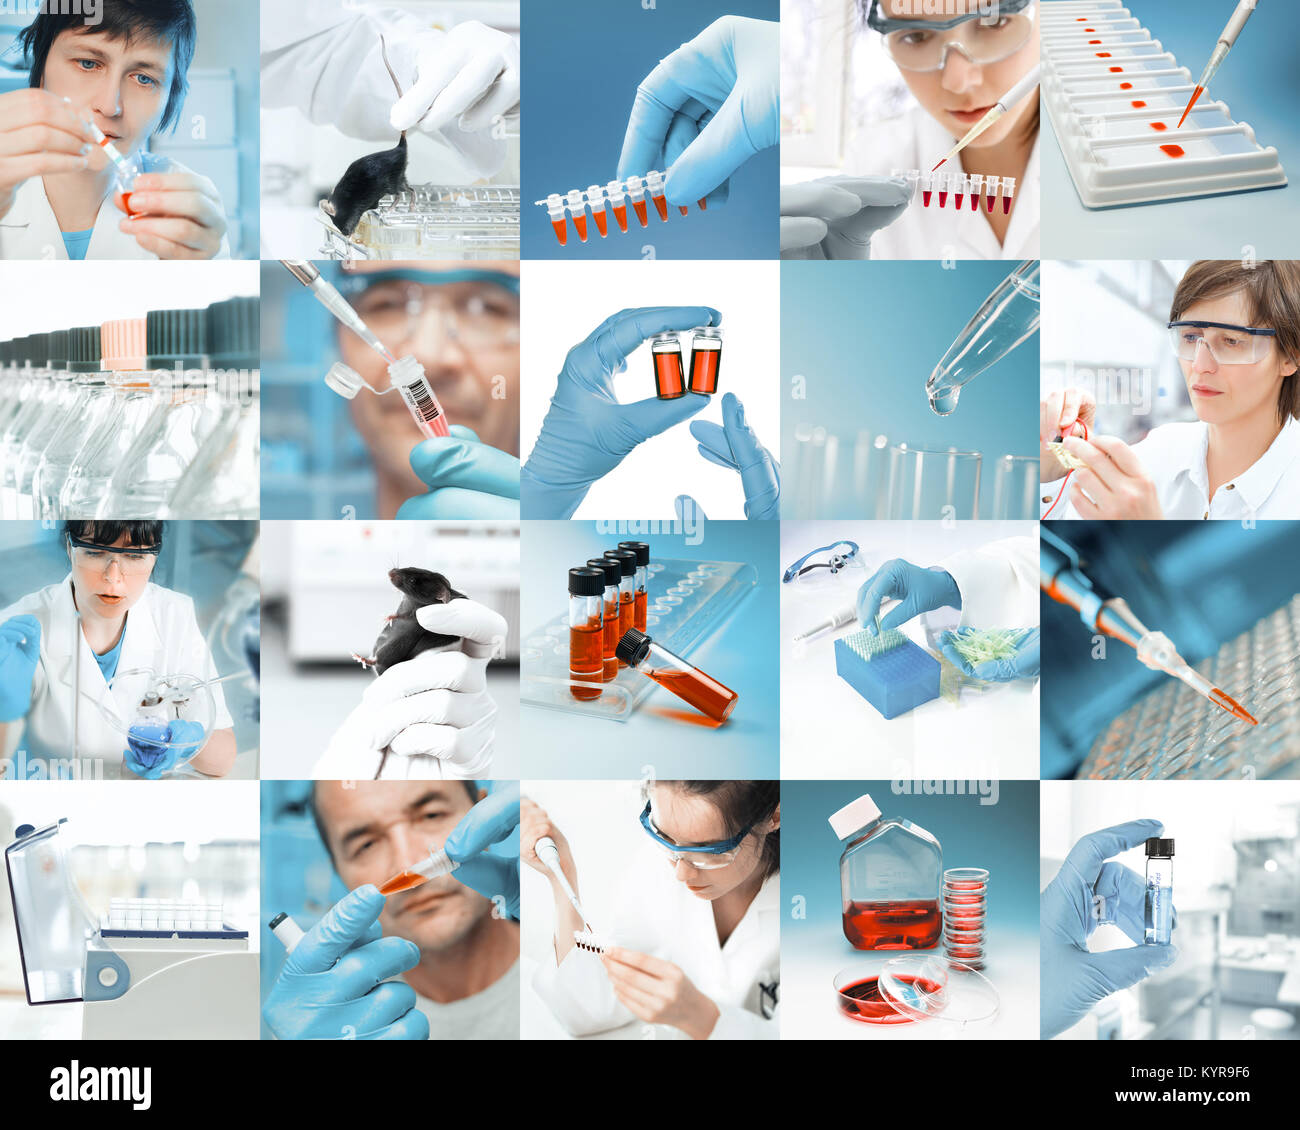 Enthusiastic scientists work in modern biological facility, picture set Stock Photo